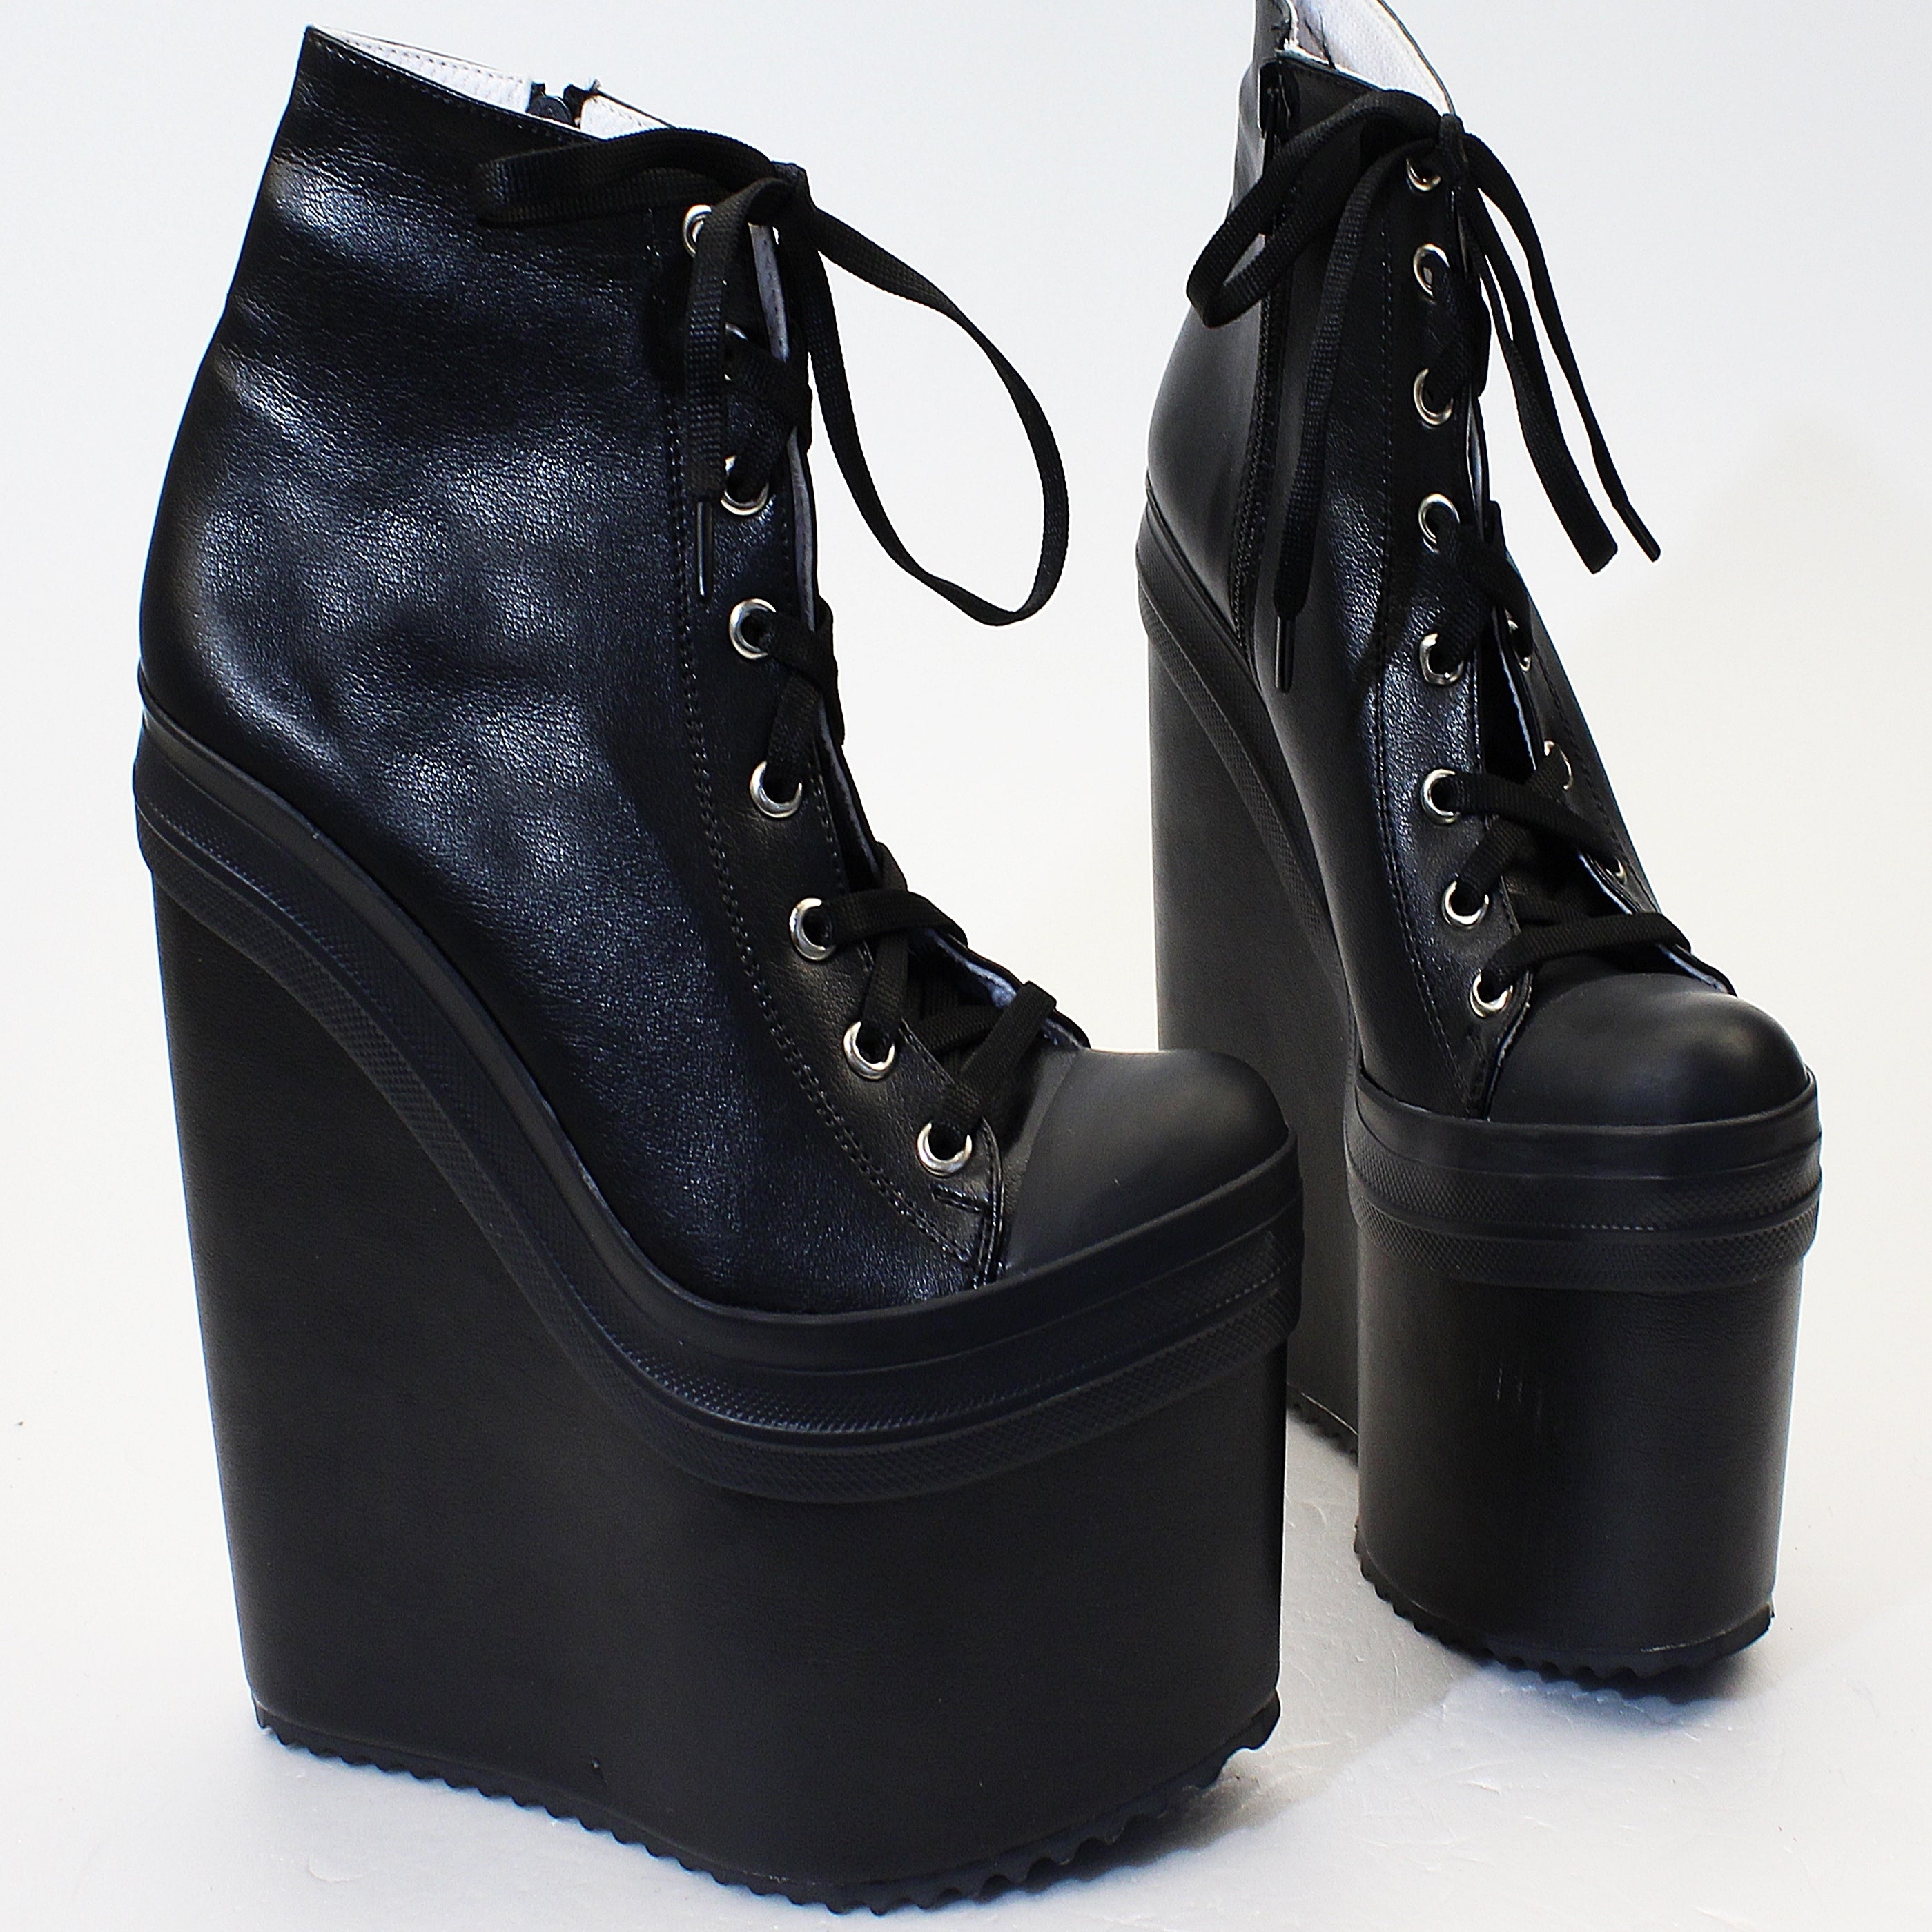 Wedge faux leather ankle boots